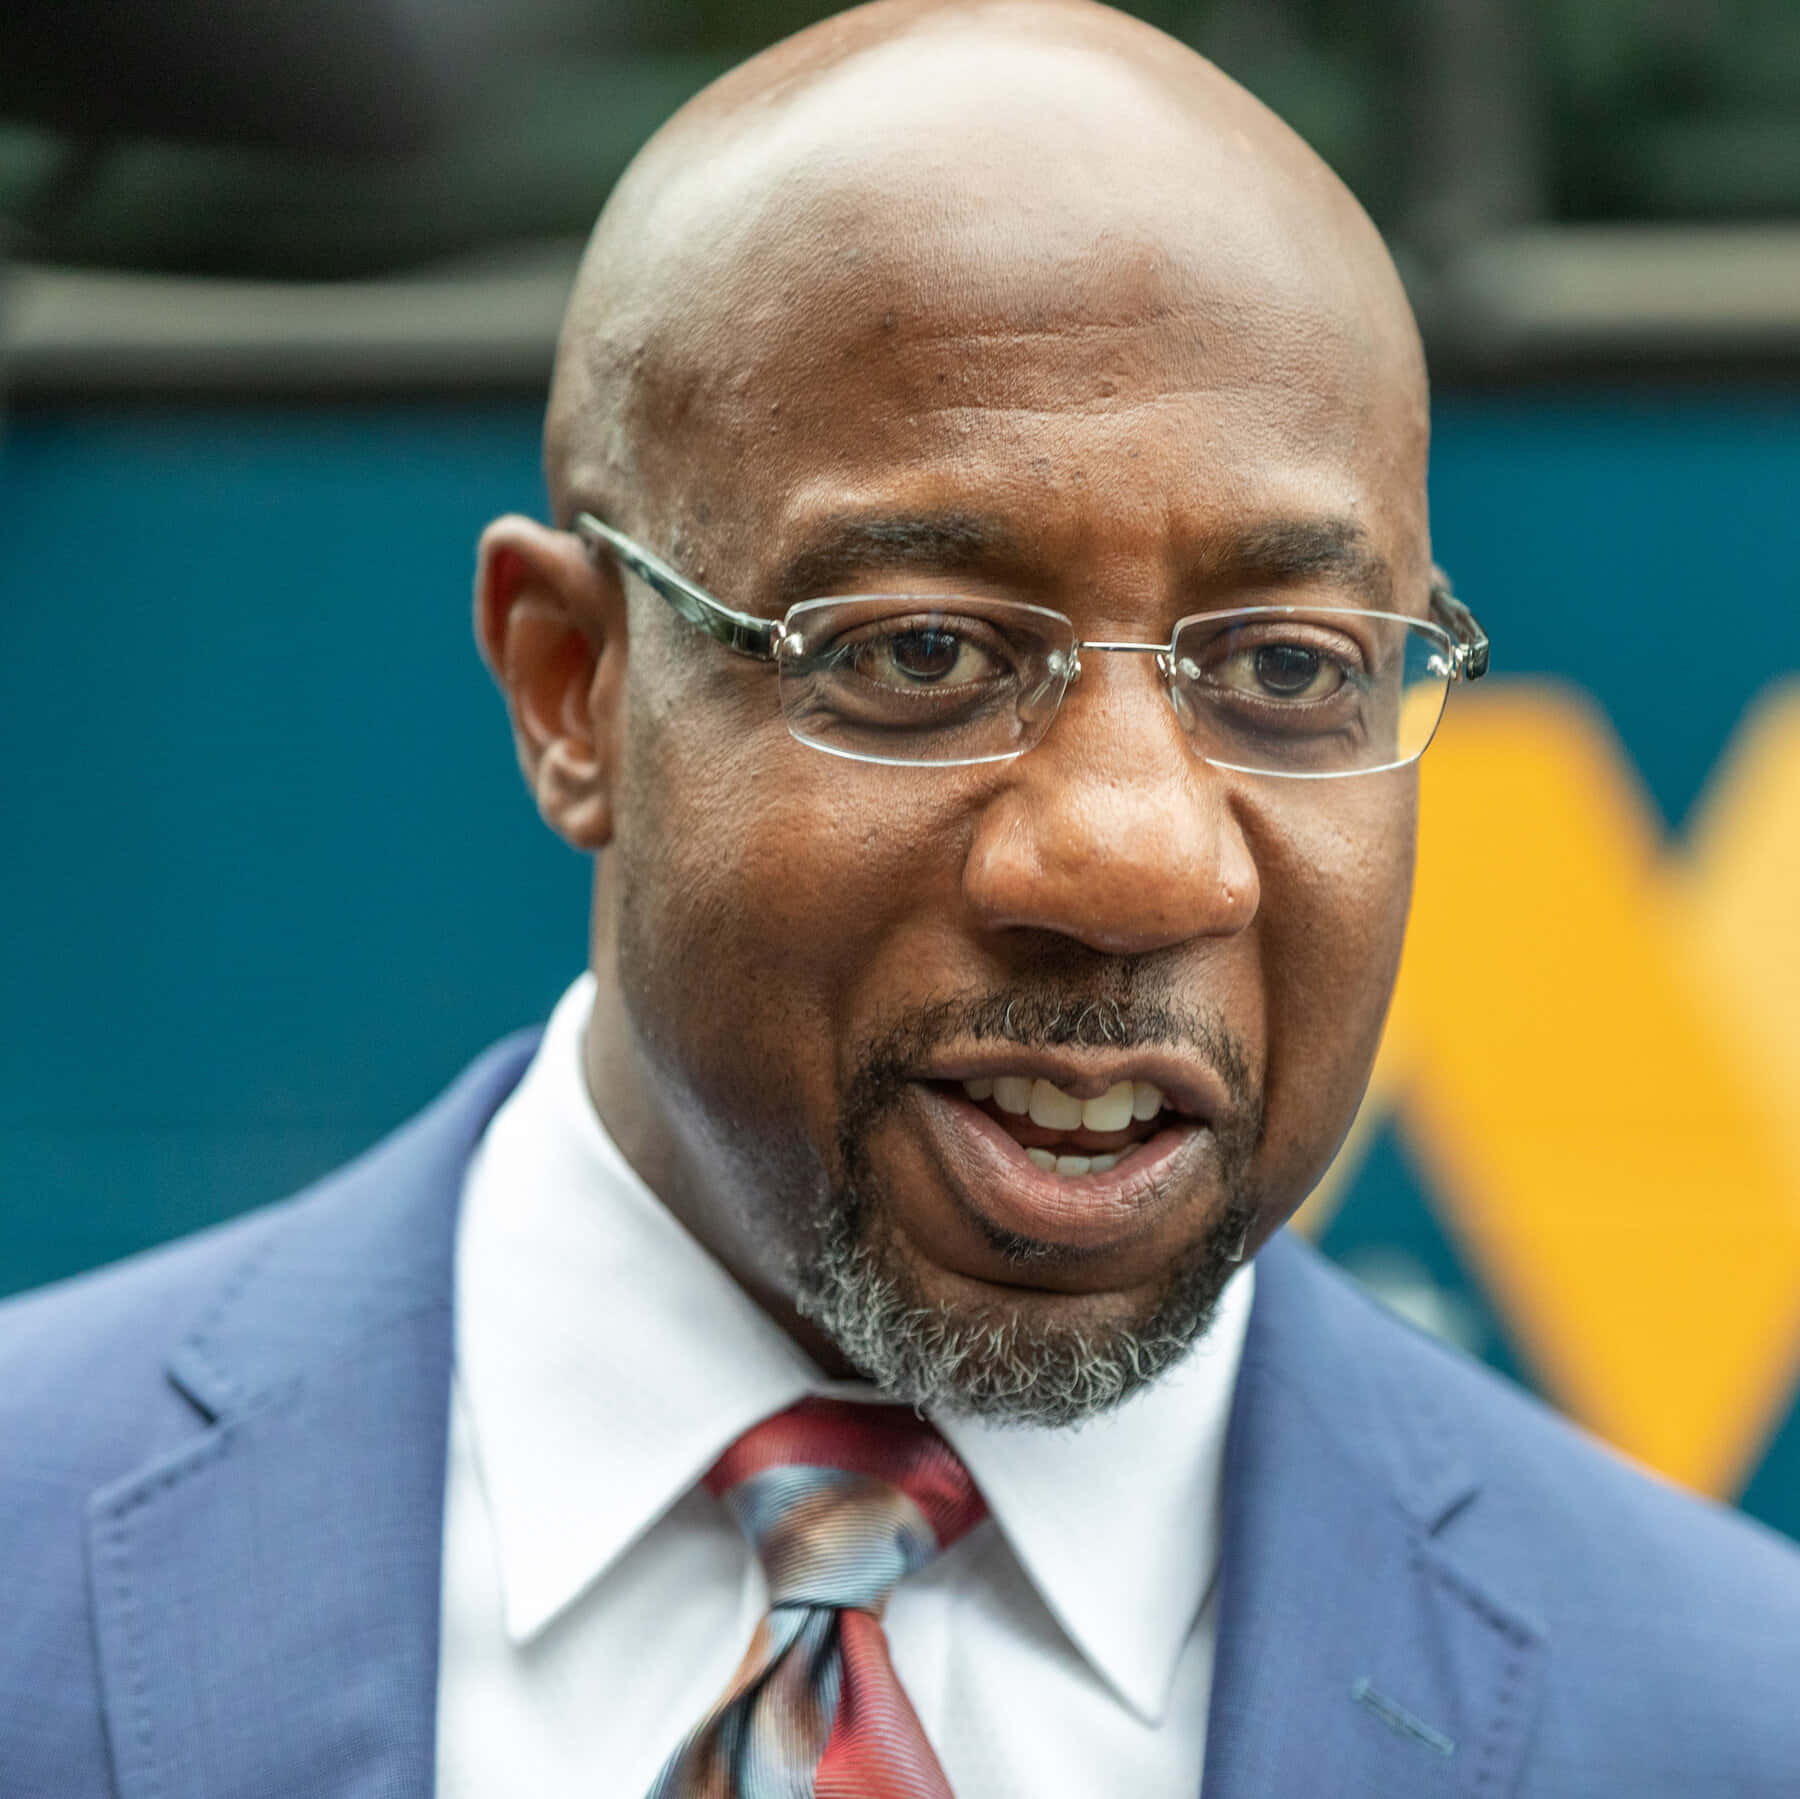 Pastorraphael Warnock Is Not A Sentence Related To Computer Or Mobile Wallpaper. It Appears To Be The Name Of An Individual. Could You Please Provide A Sentence Related To Computer Or Mobile Wallpaper That You Would Like Me To Translate Into Spanish? Fondo de pantalla